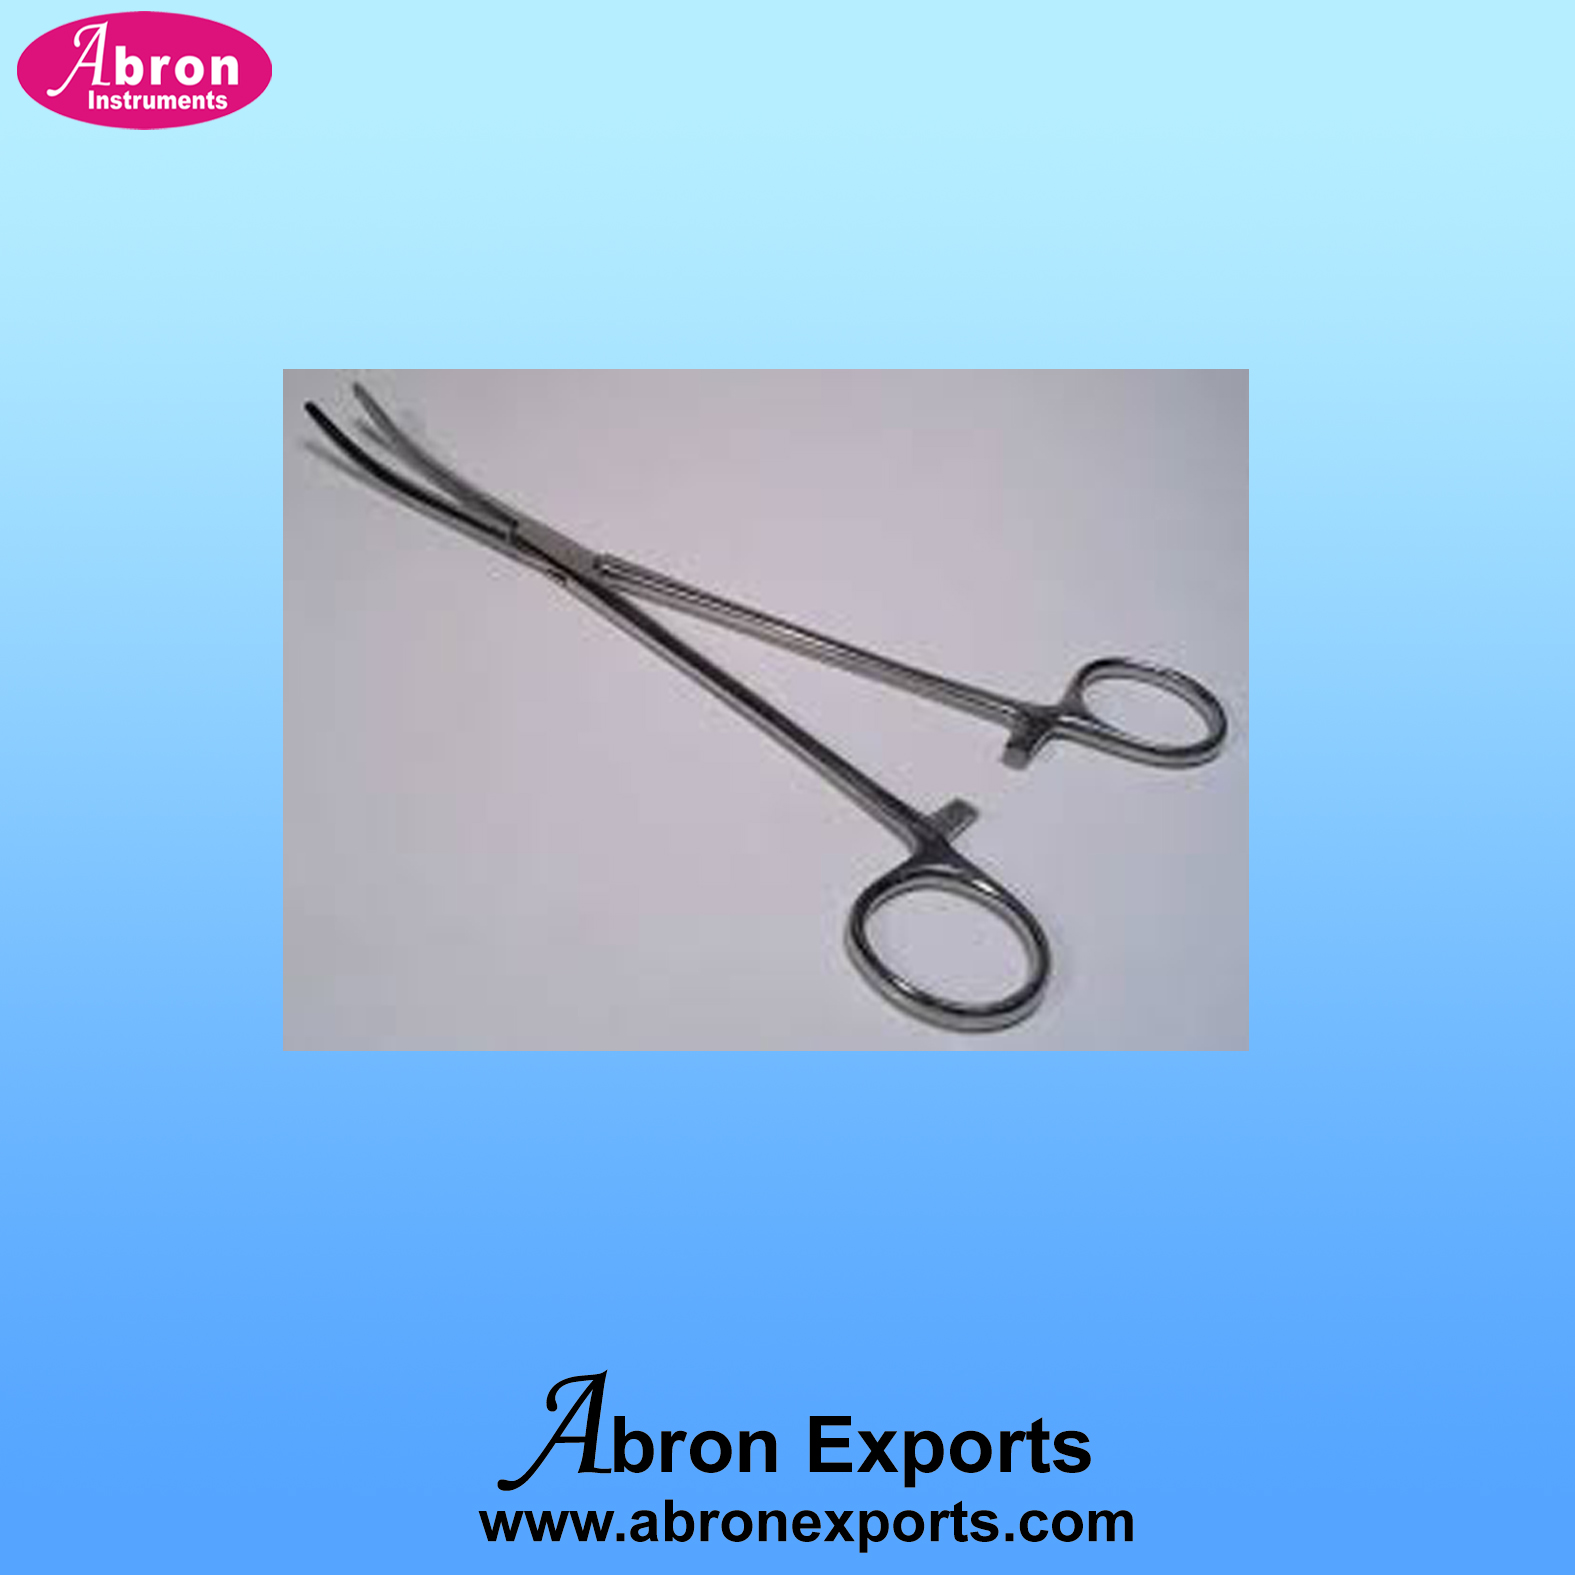 Surgical abron forceps heamostetical curved ABM-2620-26 